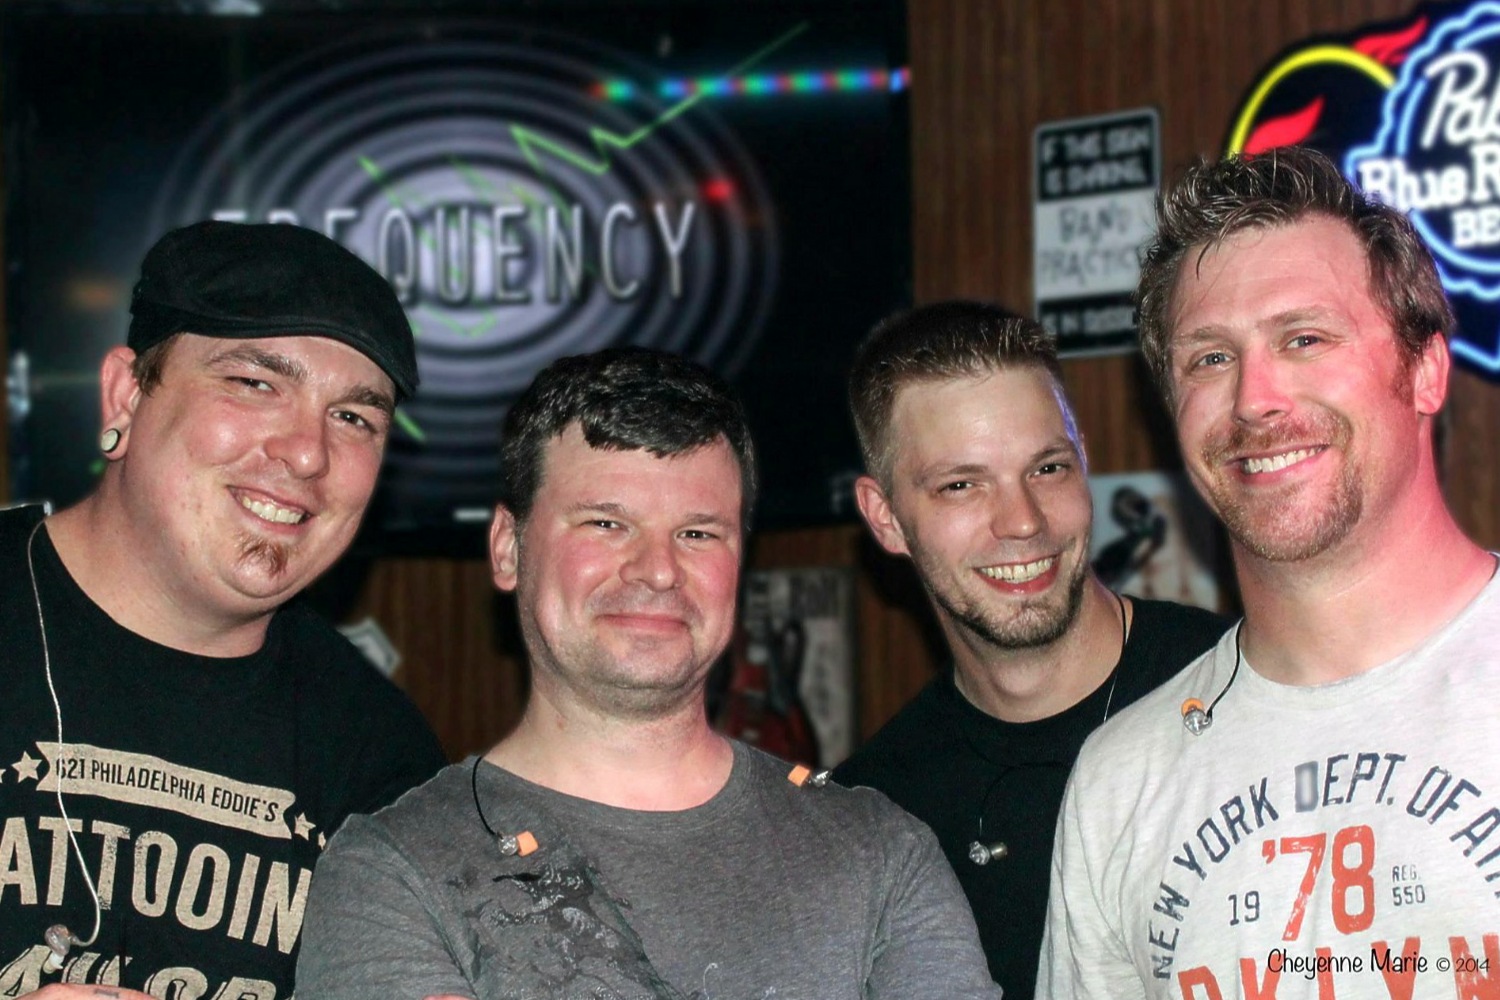 Live Music featuring Frequency at Shenanigan's Bar in Columbus, Nebraska - 
						Northeast Nebraska Musicians Frequency    
						performing live in the Beer Garden at Shenanigan's Bar in Columbus, Nebraska on 
						Saturday, April 30, 2016. 
						Shenanigan's Bar is located at  
						3808 E 23rd Street, 
						Columbus, NE 68601, 
						Phone: (402) 563-9256.